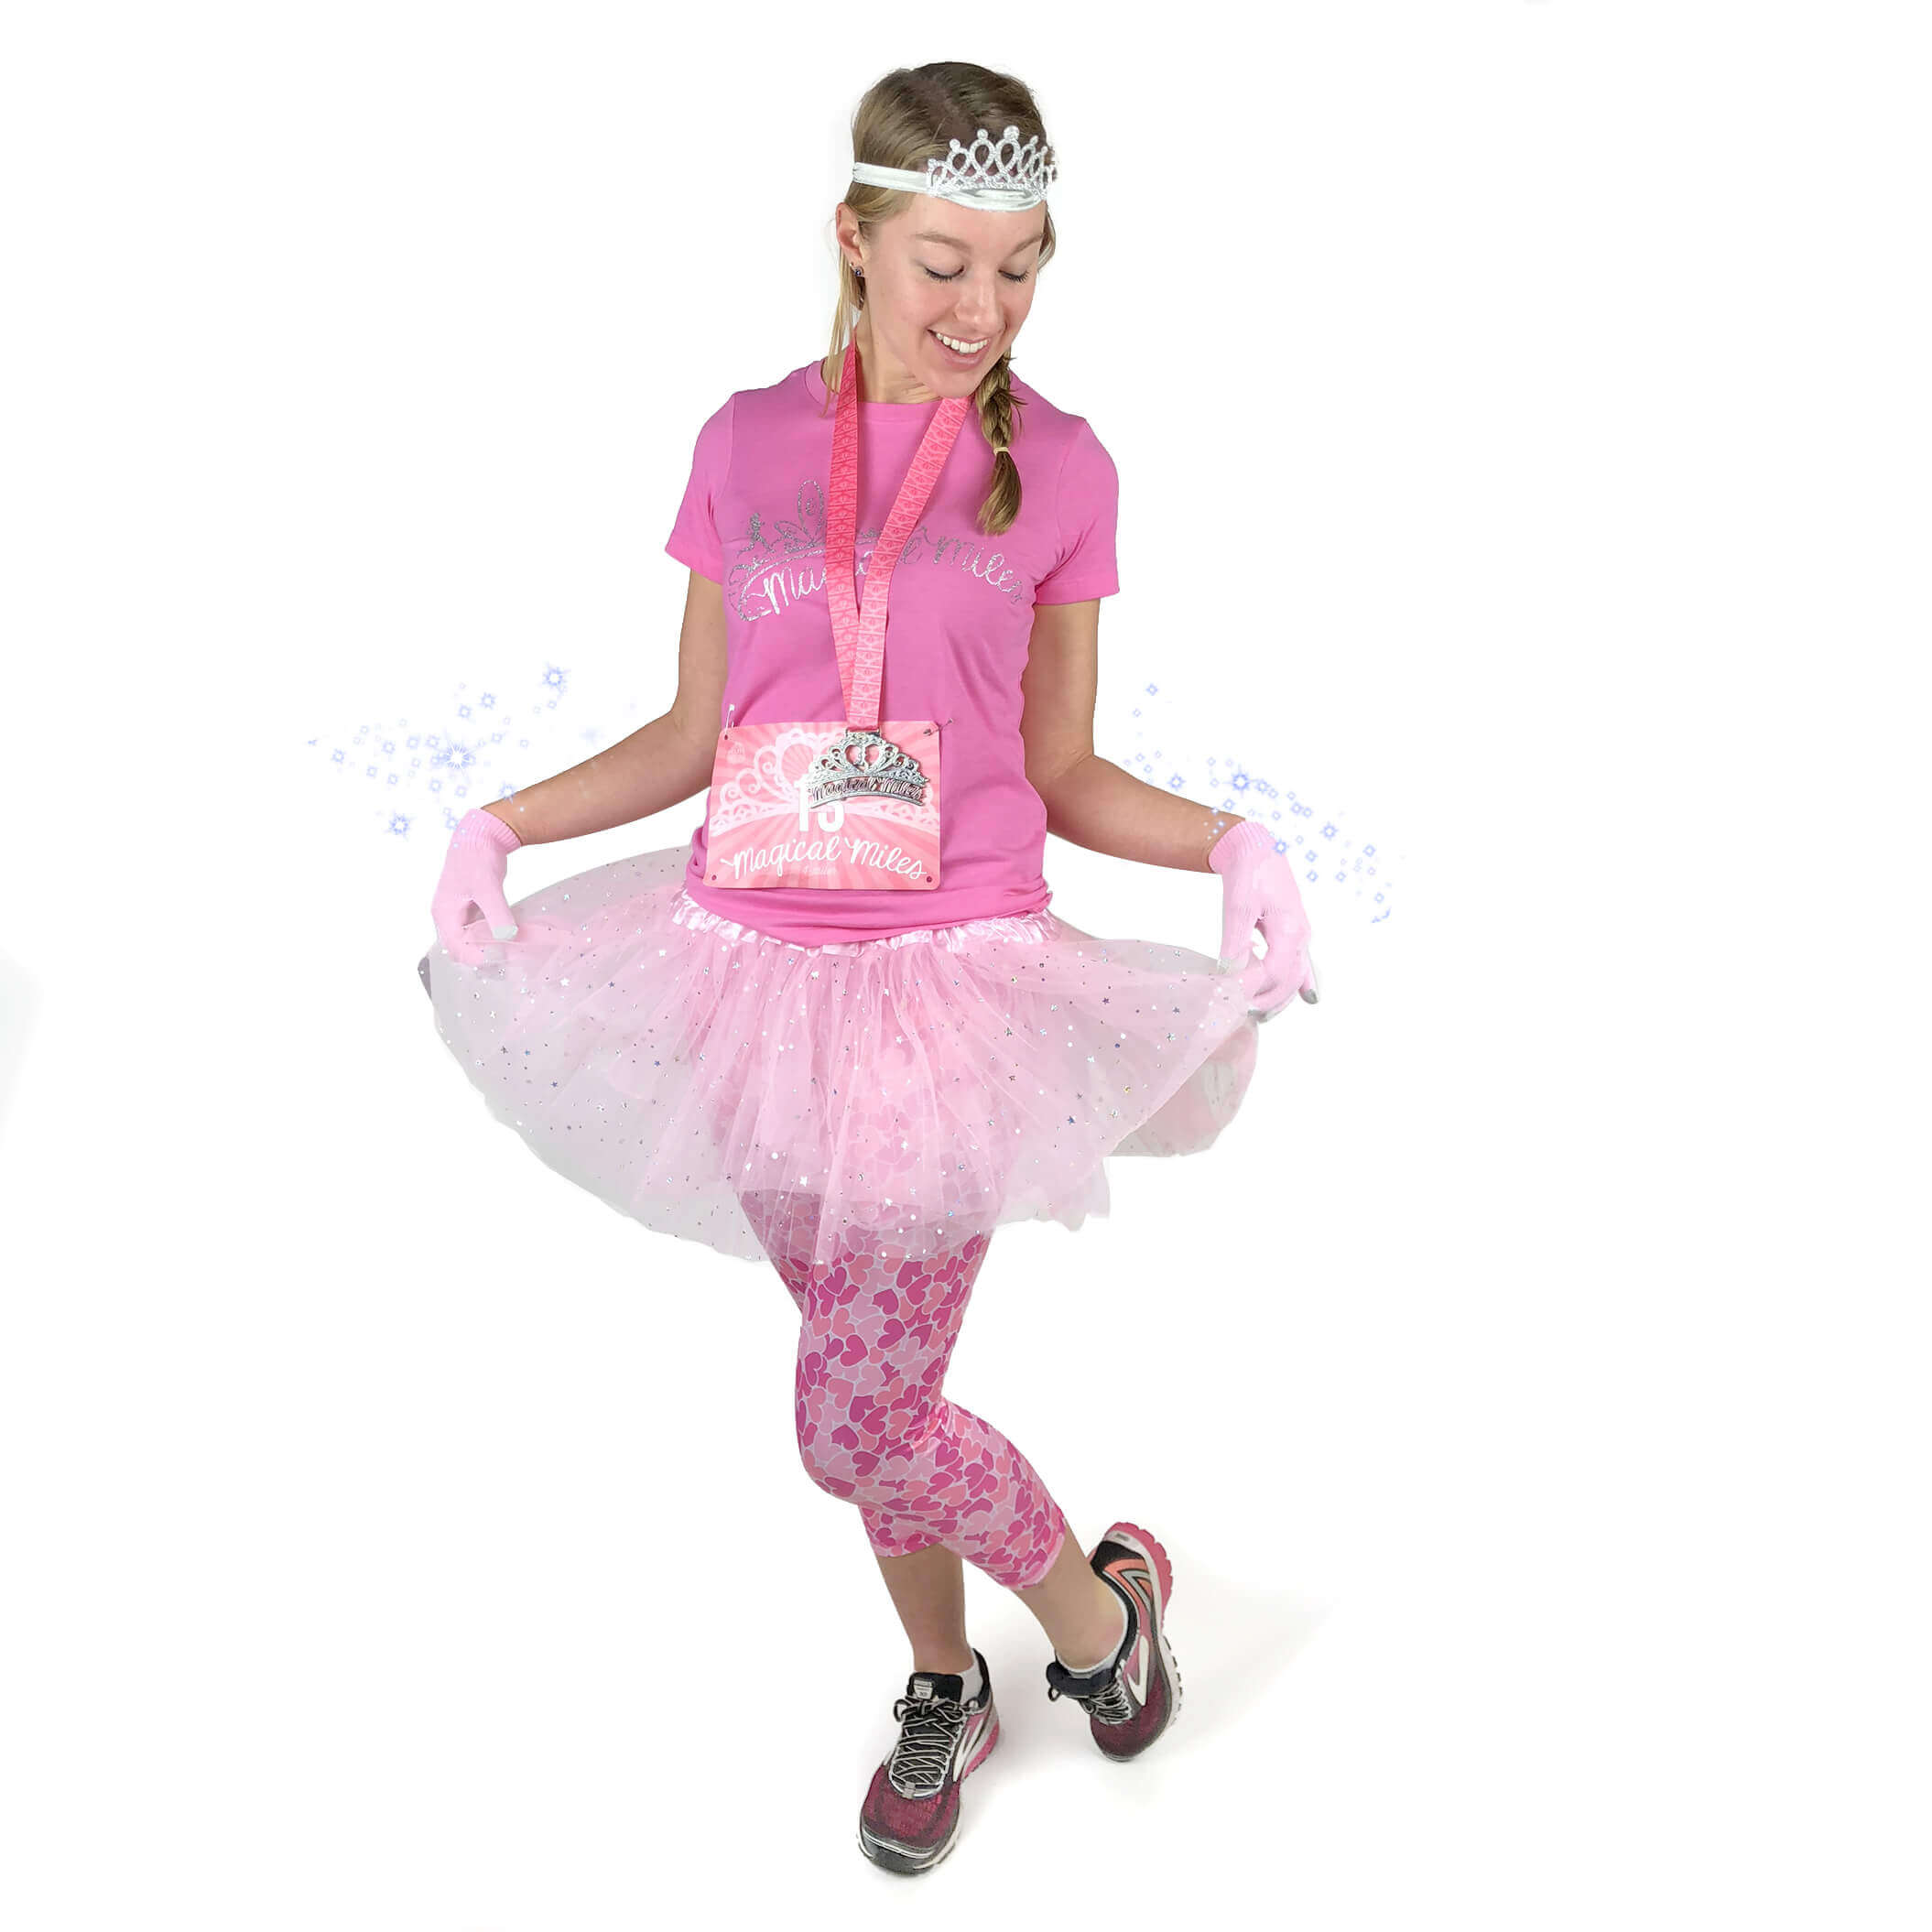 Magical Miles Running Costume Pink